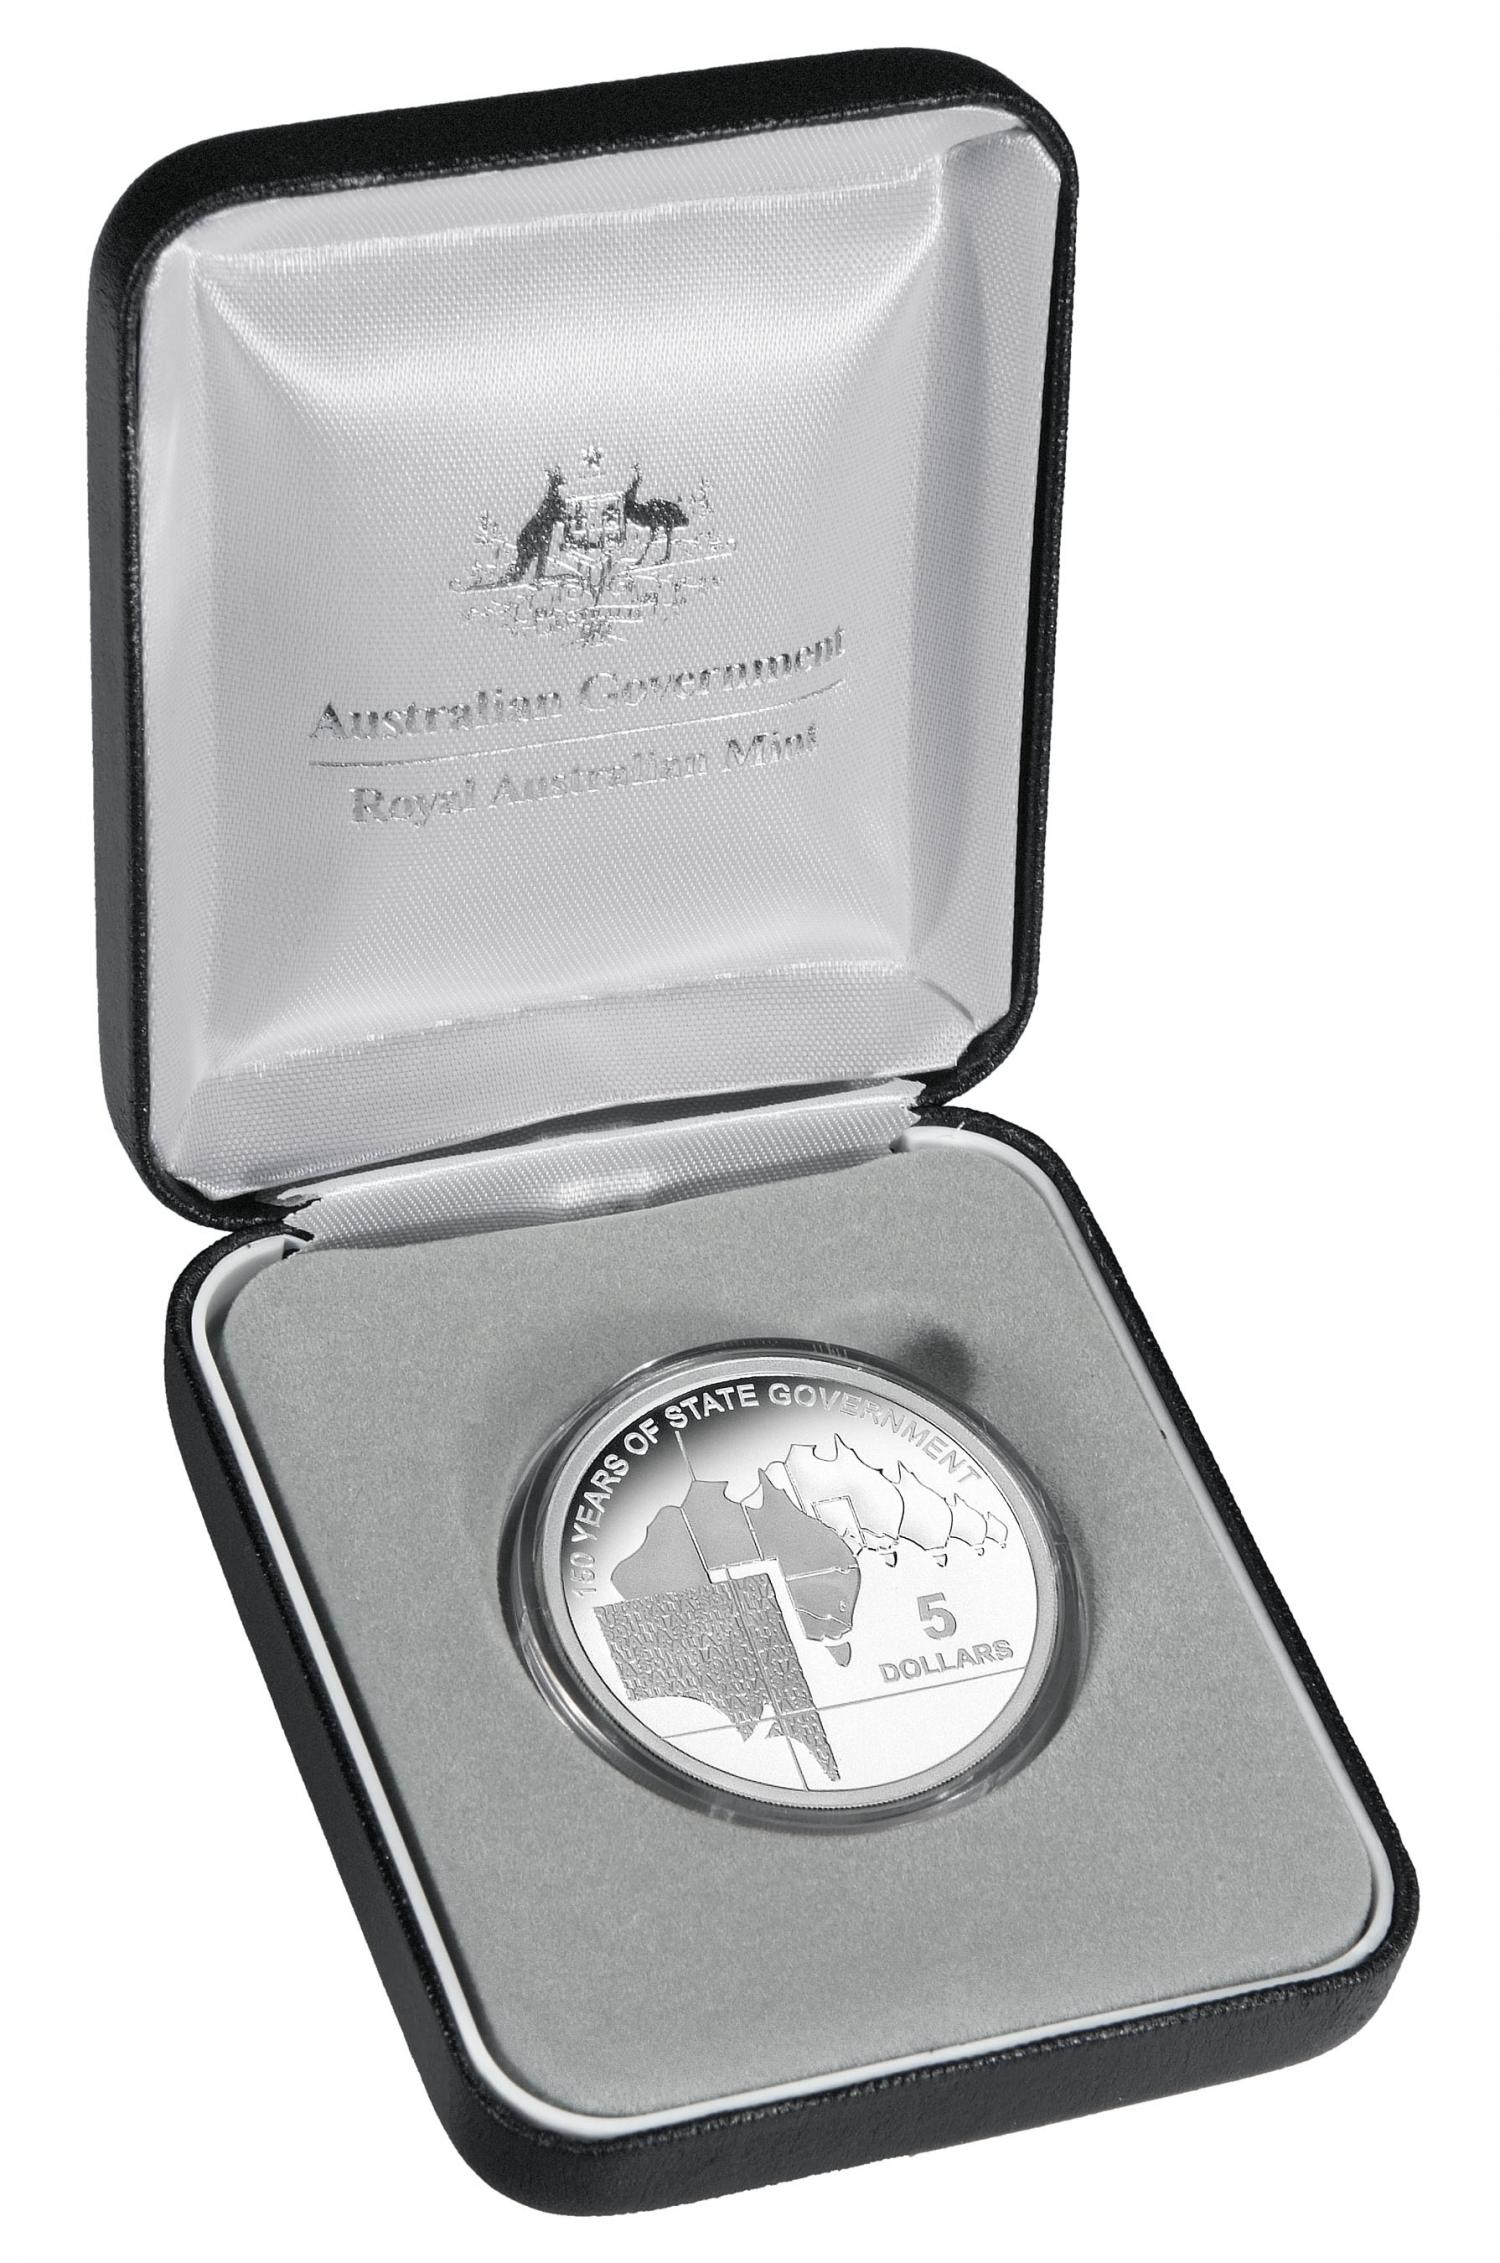 Thumbnail for 2007 $5.00 Silver Proof South Australia 150 Years of State Government